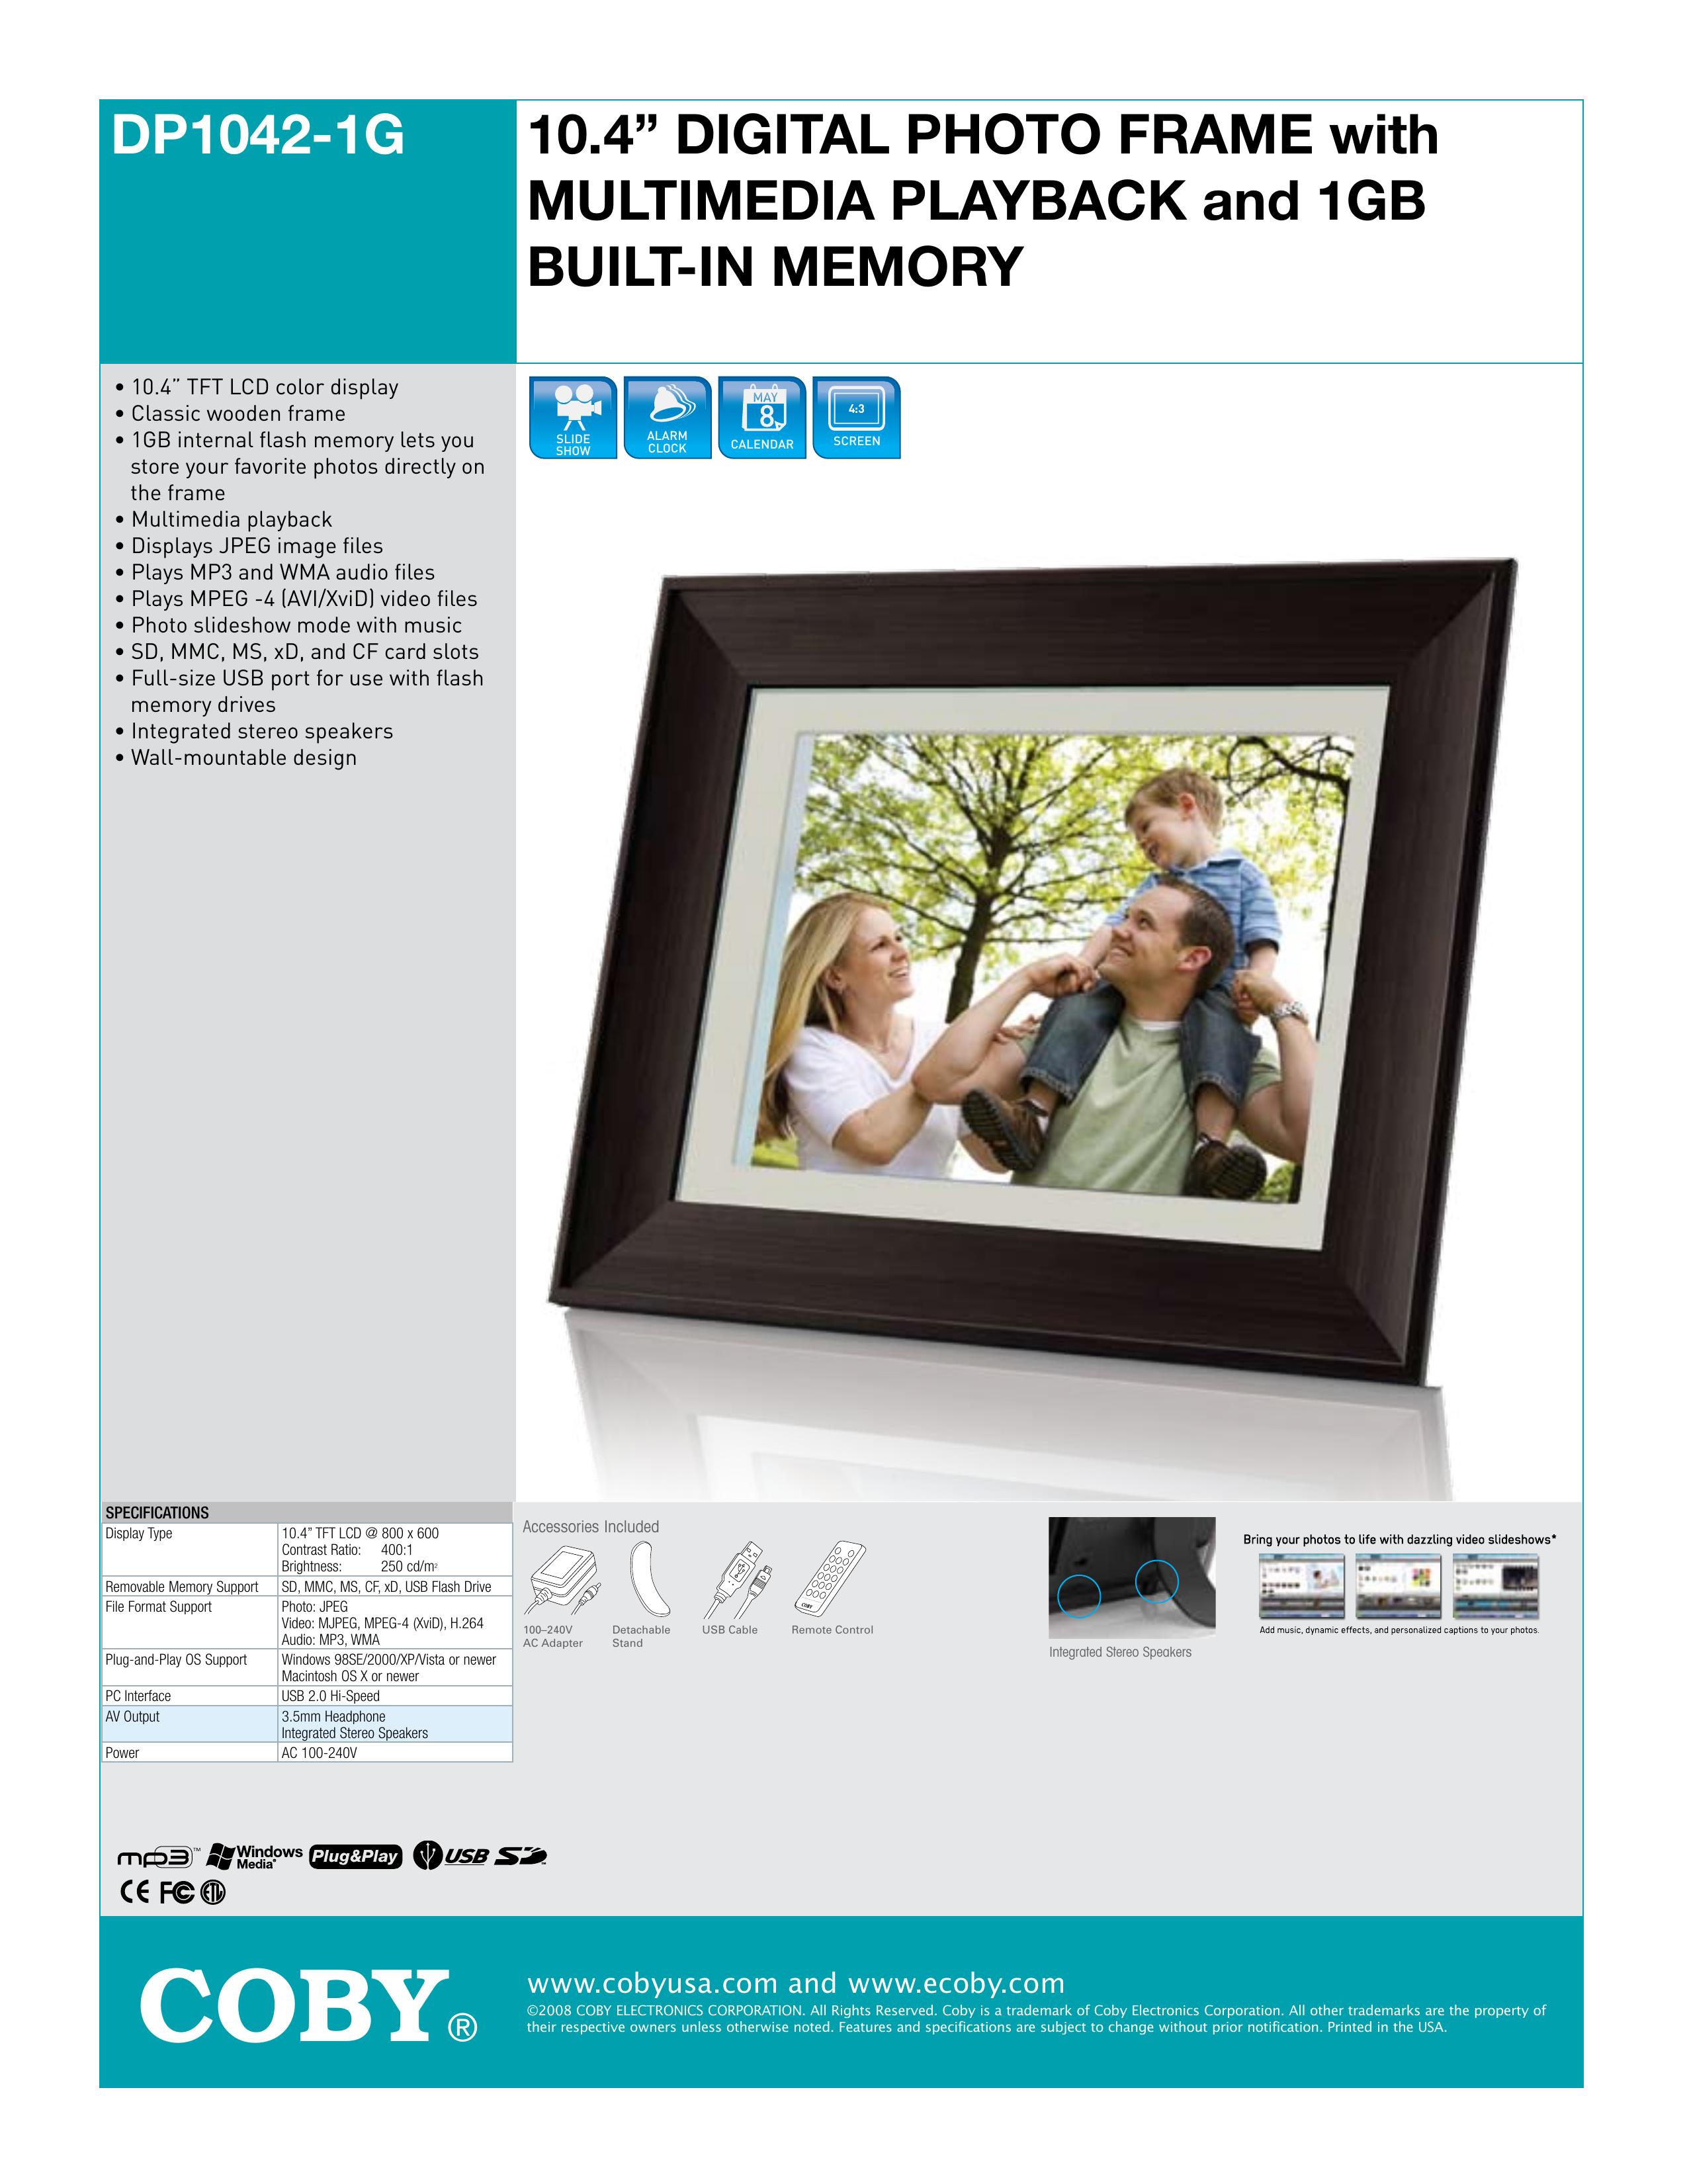 COBY electronic DP1042-1G Digital Photo Frame User Manual